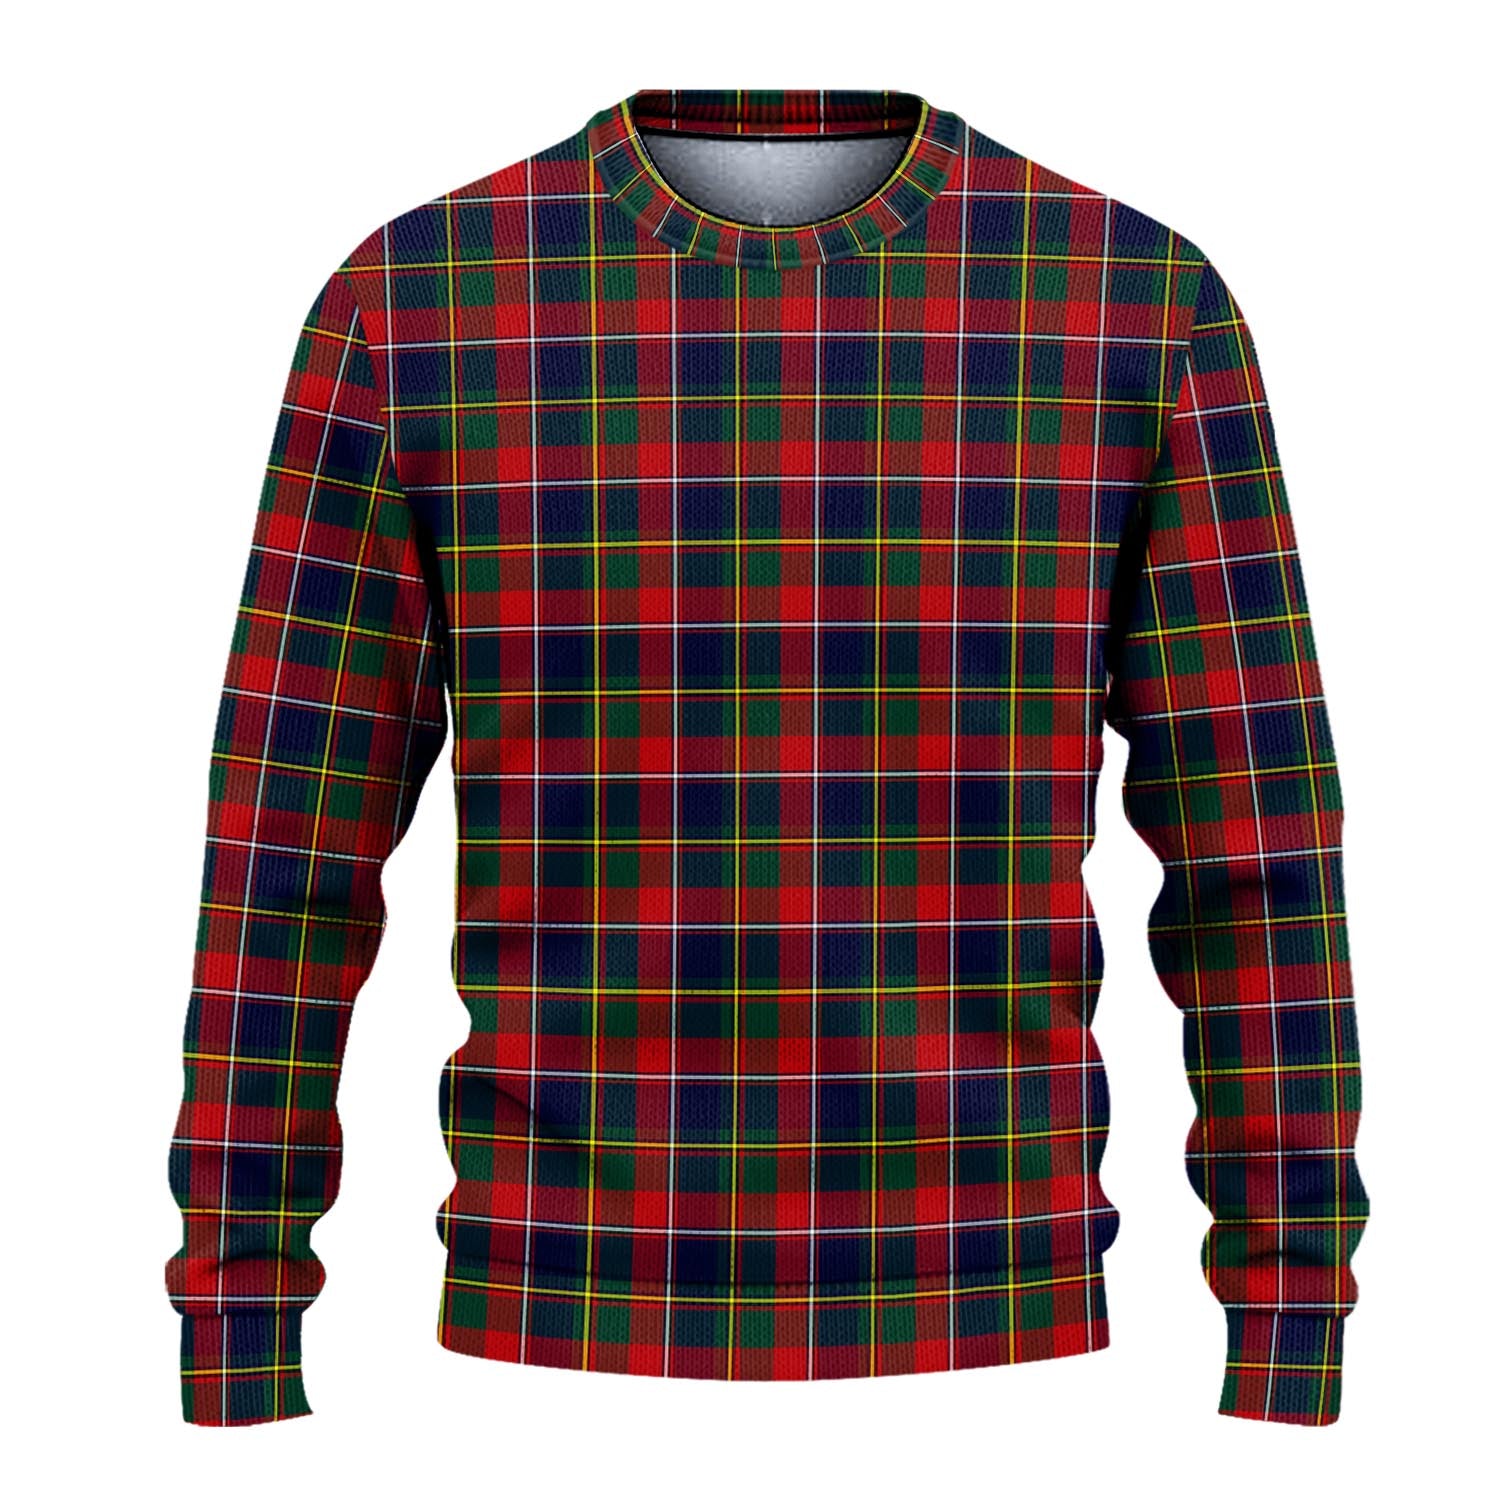 Quebec Province Canada Tartan Knitted Sweater - Tartanvibesclothing